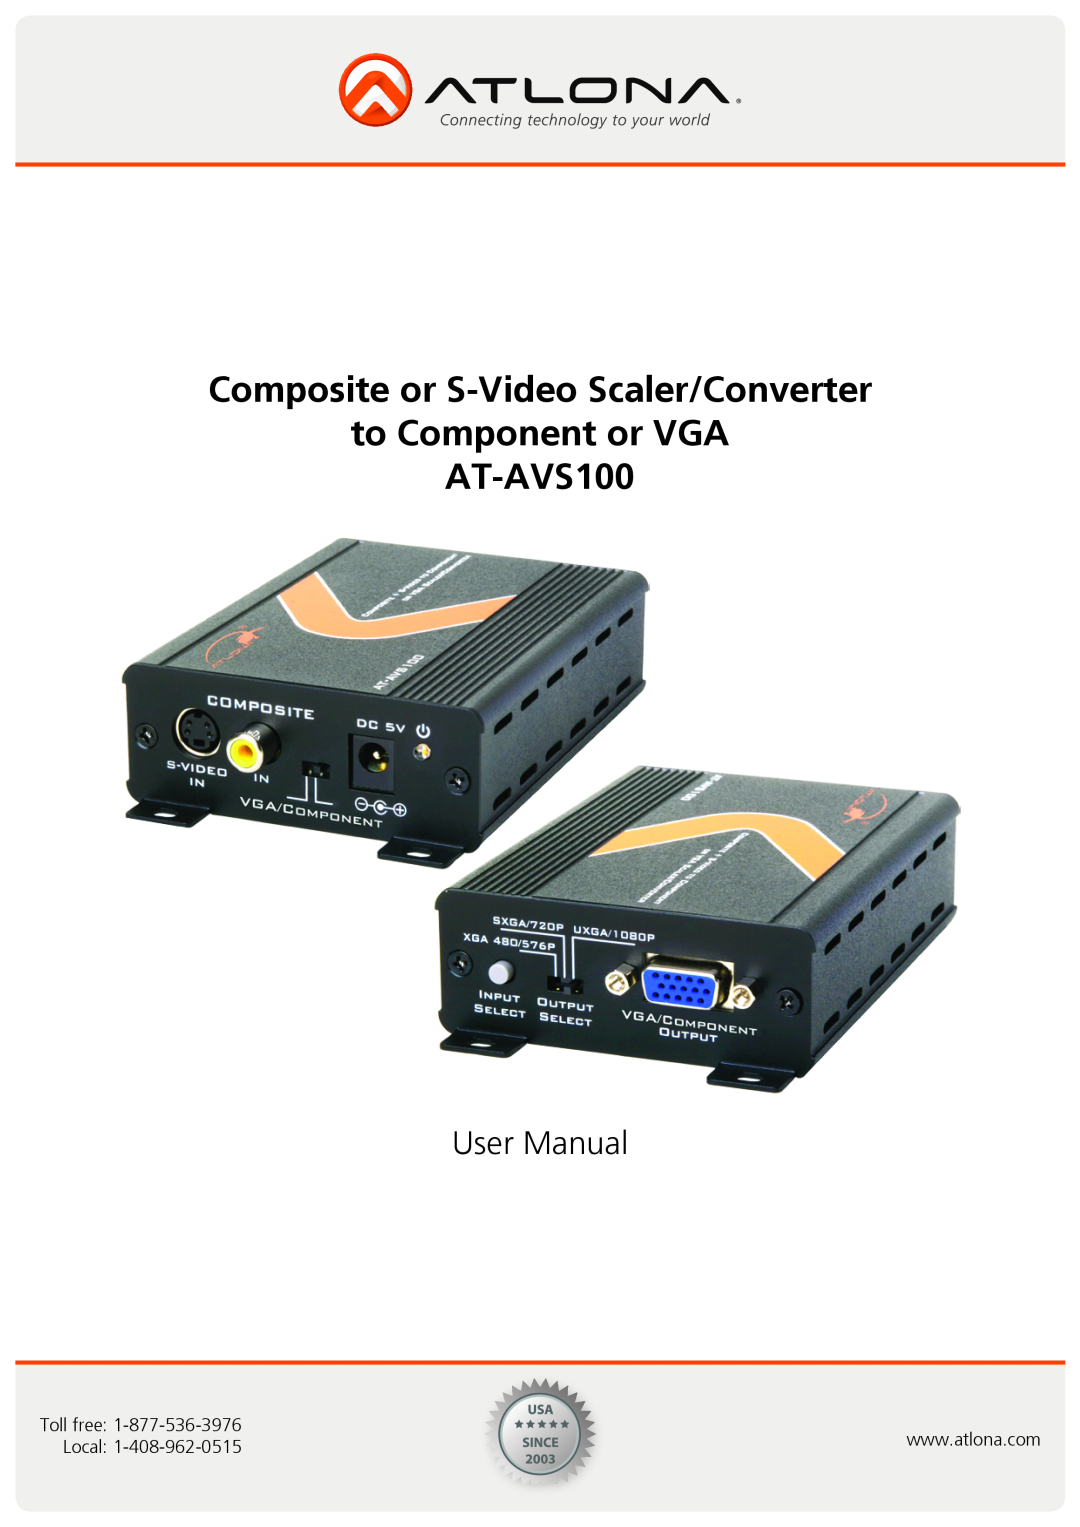 Atlona user manual AtlonA, Composite and S-Video to Component or VGA Scaler/Converter AT-AVS100, User Manual 